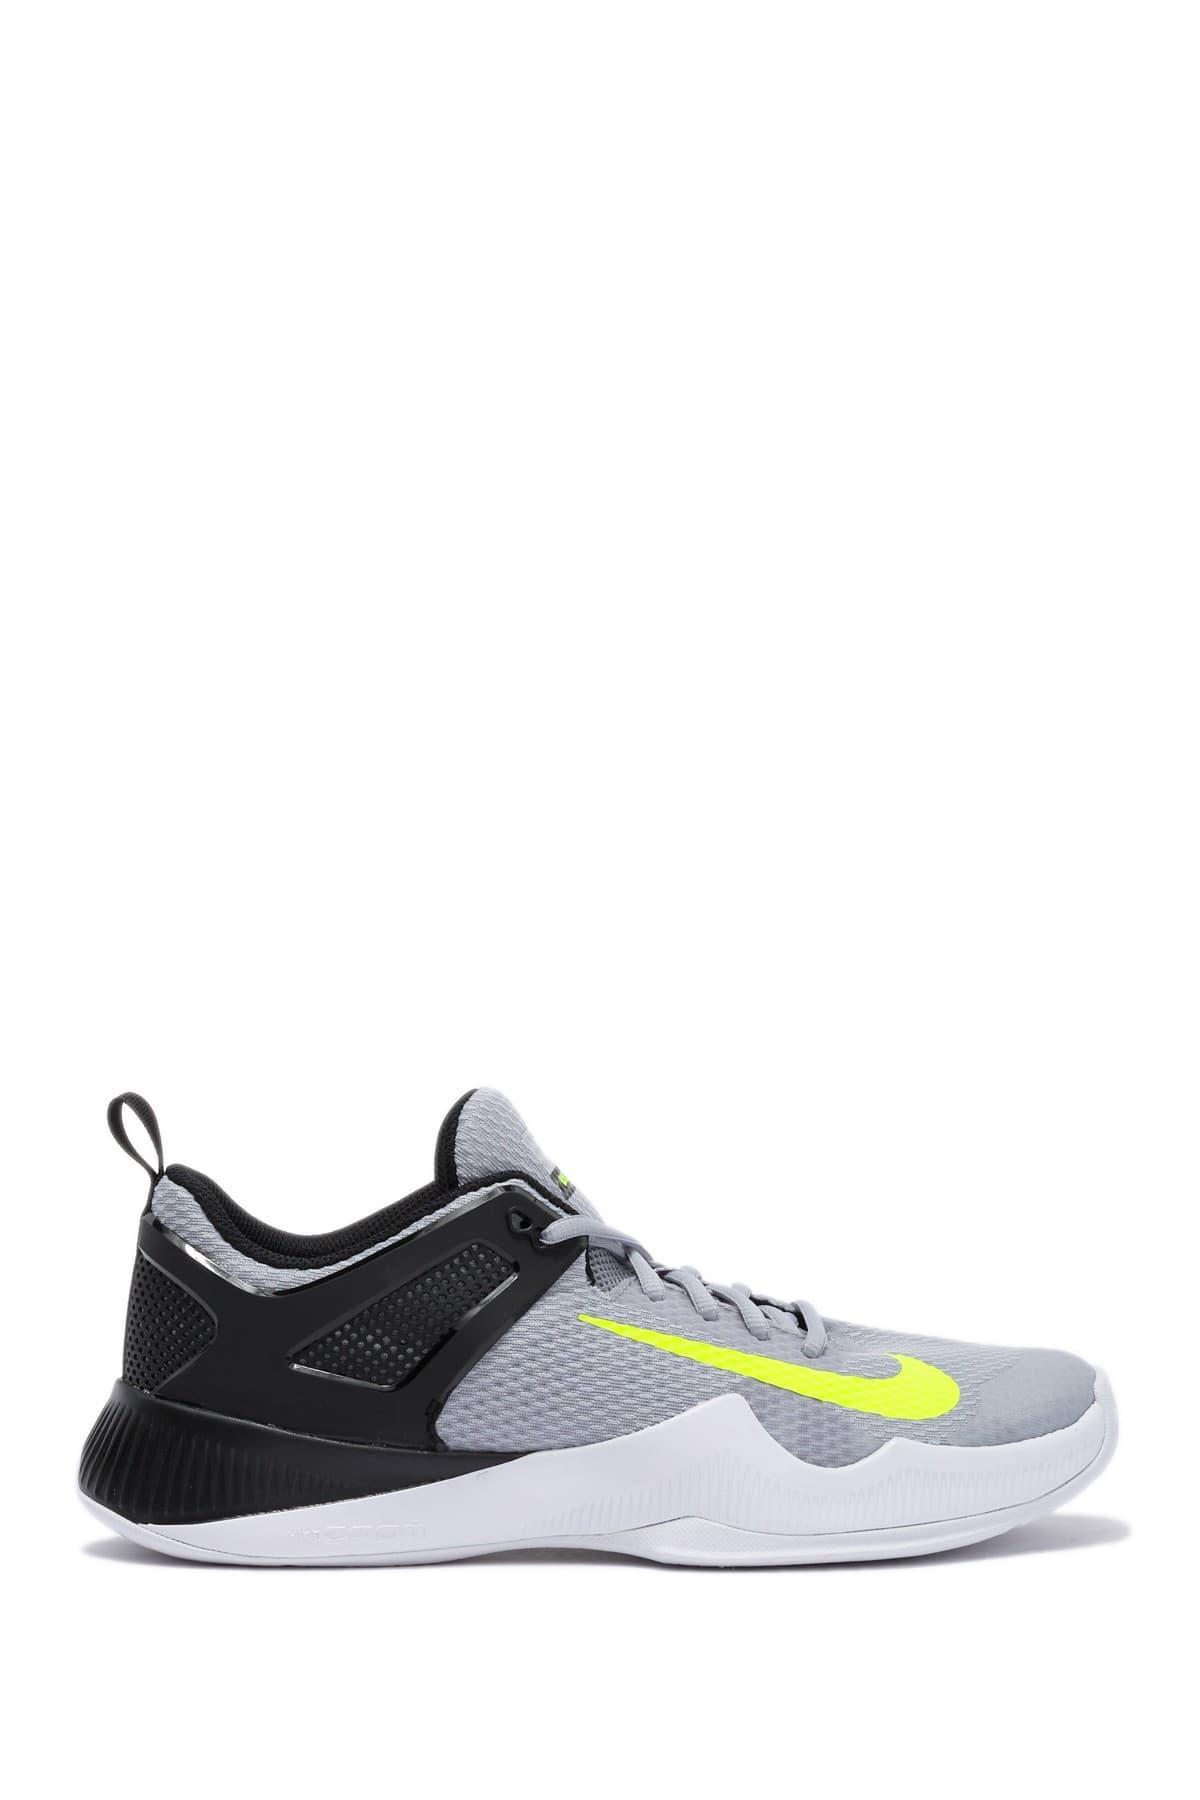 Nike Air Zoom Hyperattack - Black / Silver | Size: 16 Unisex